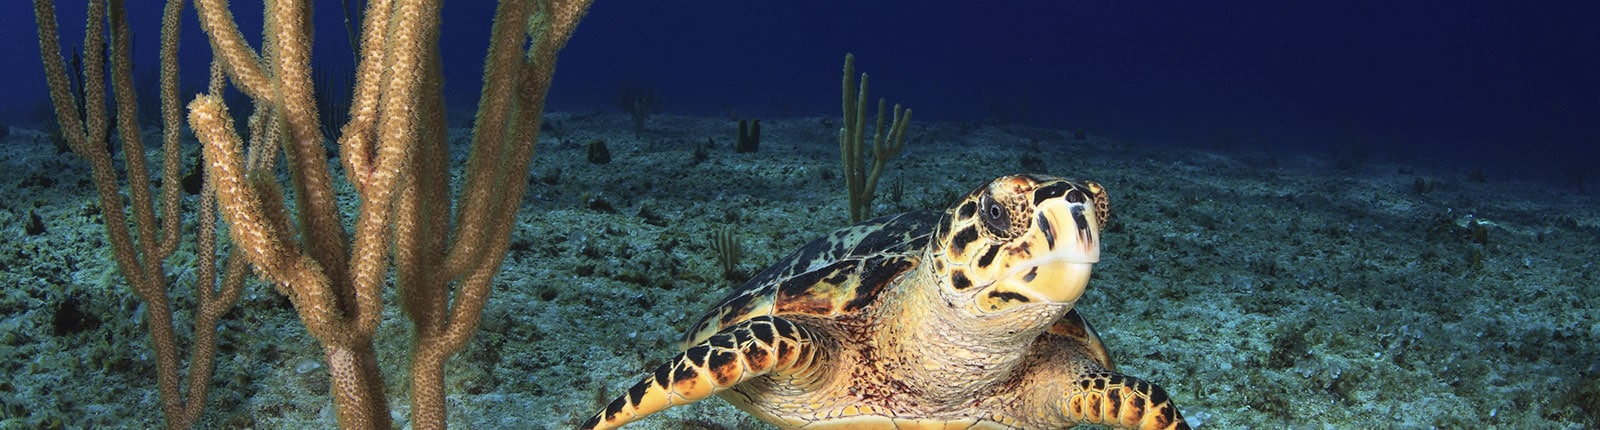 Snorkeling with a grand turtle under the water off Grand Cayman